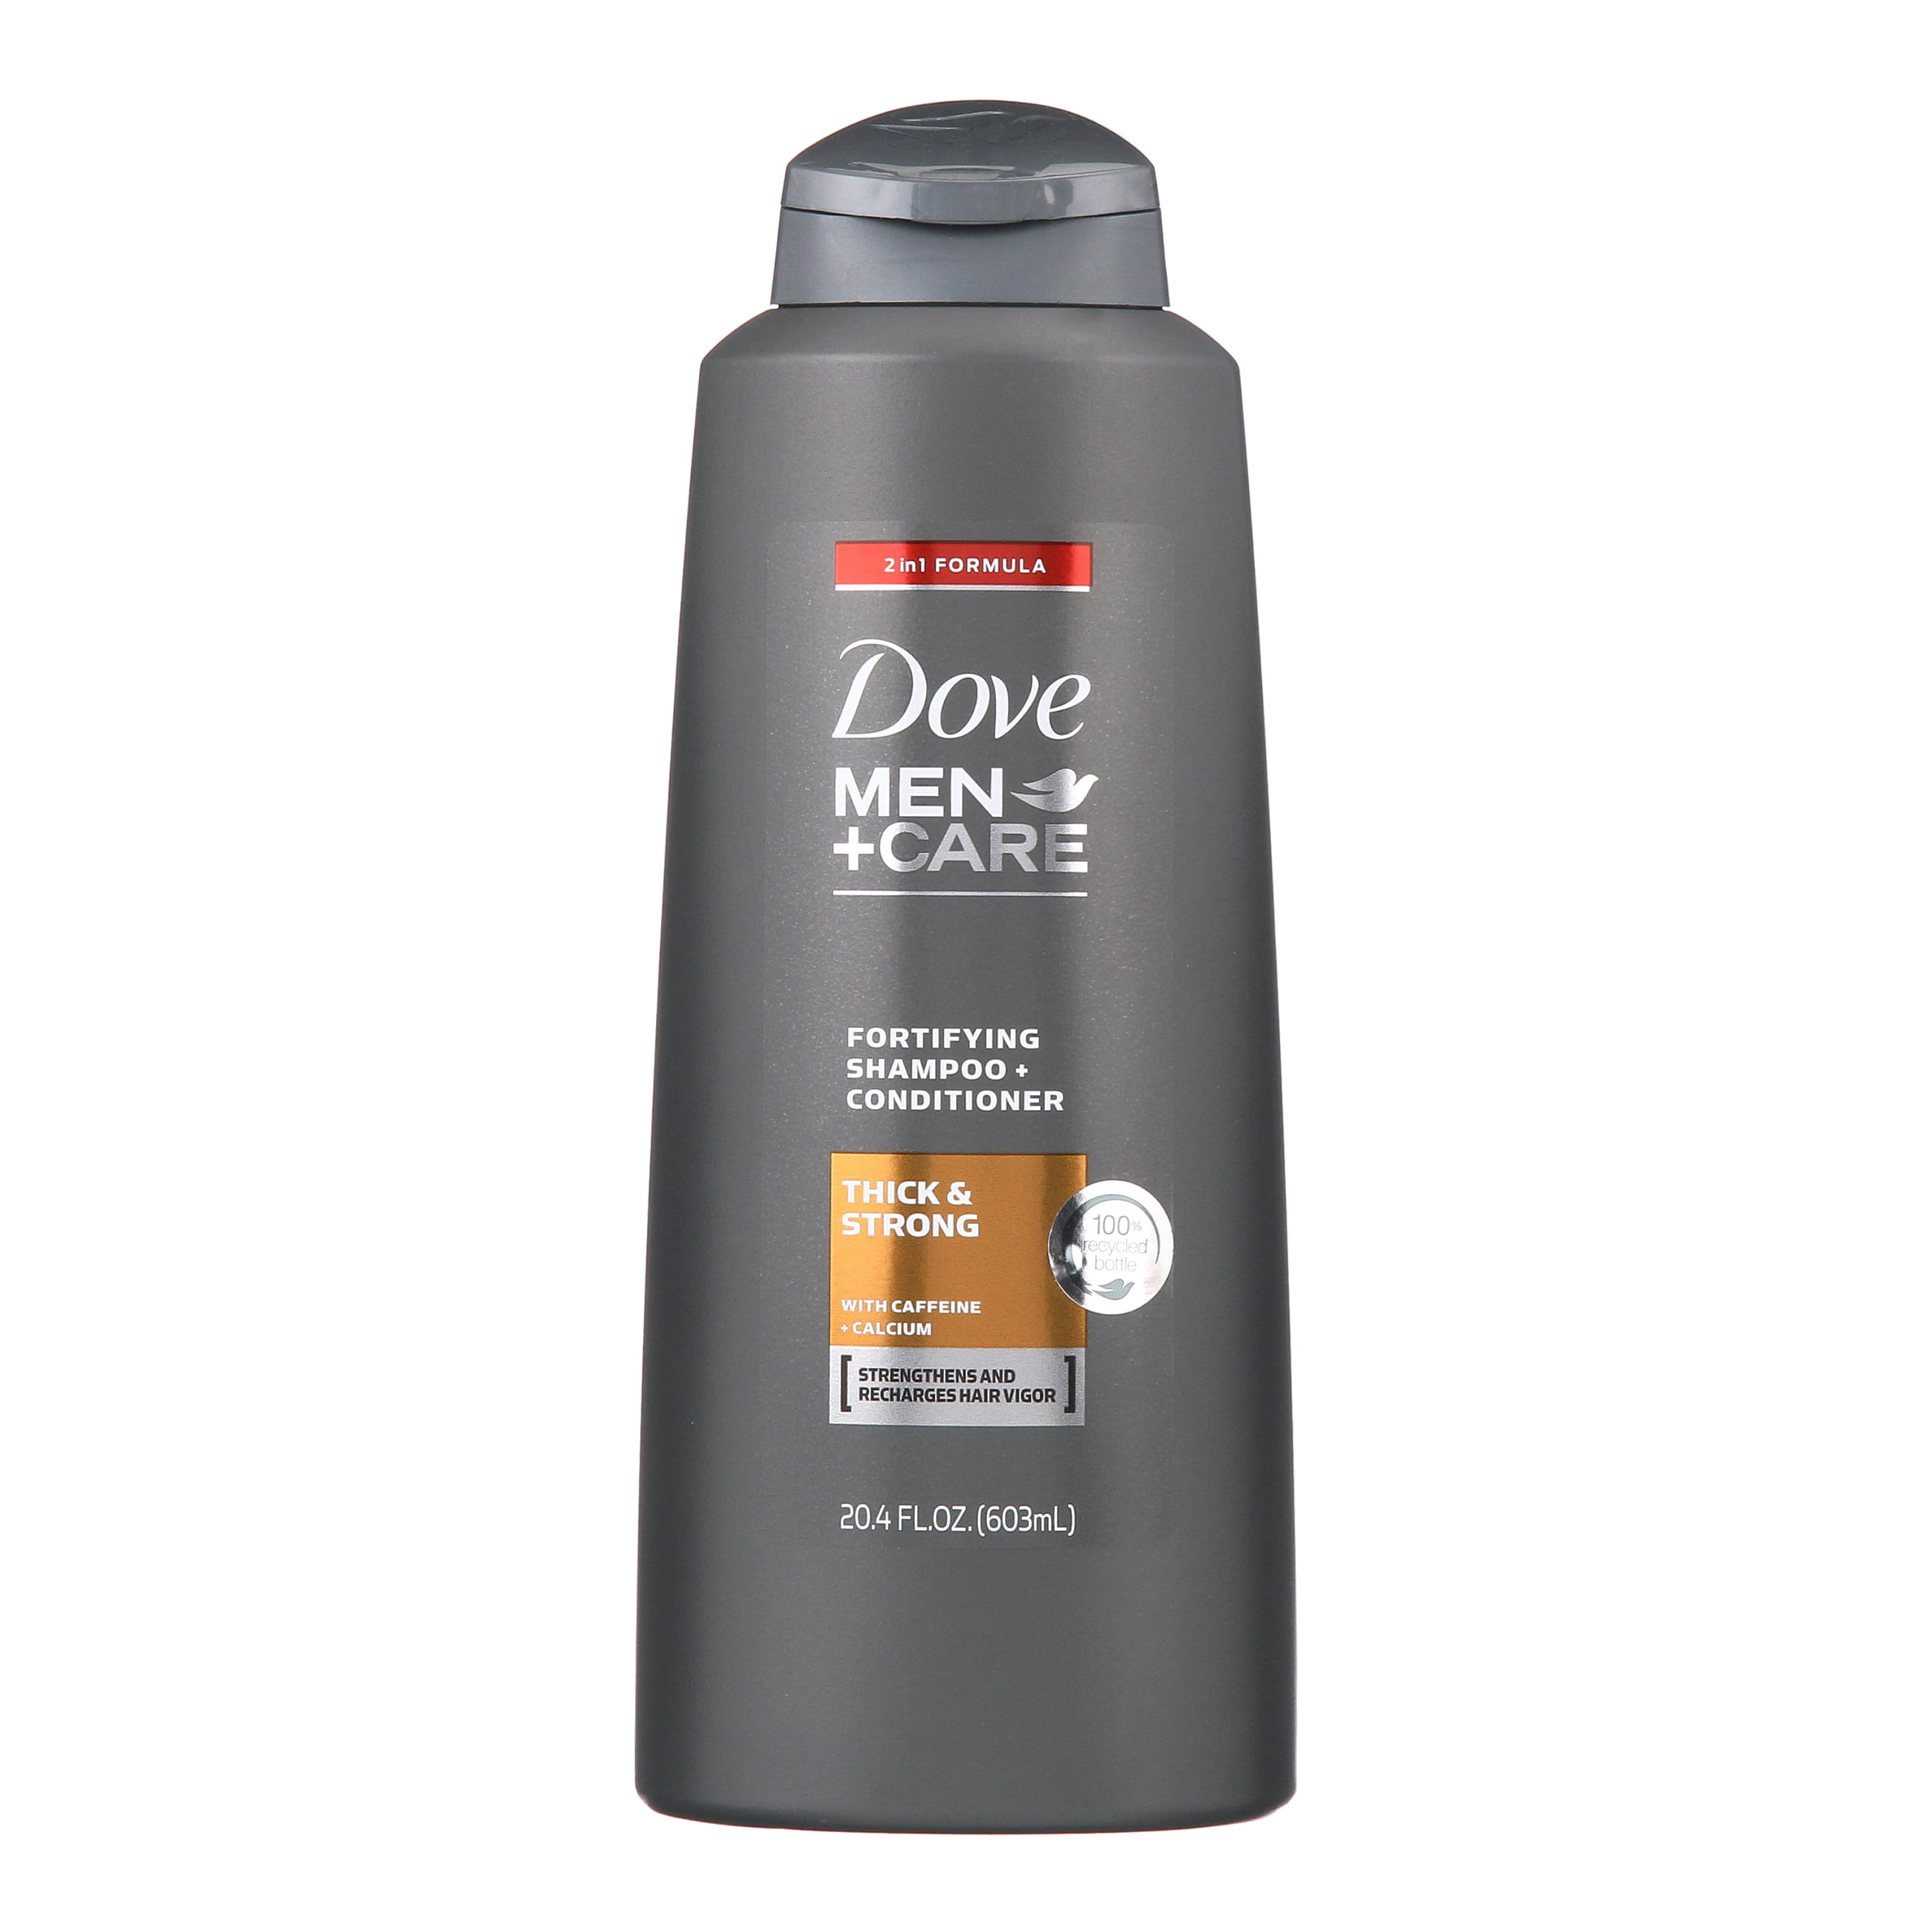 Dove men care thickening fortifying shampoo